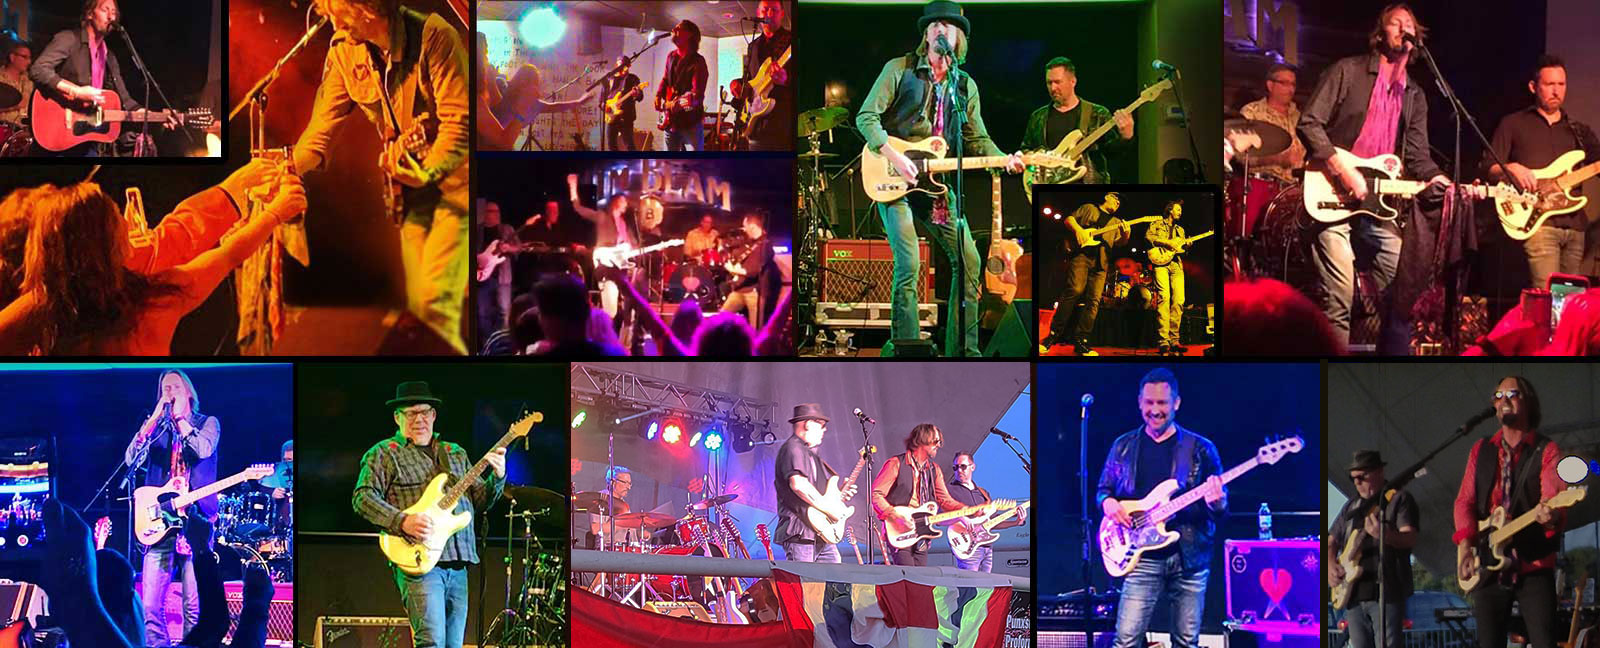 Don’t Back Down, Maryland's premier Tom Petty and the Heartbreakers tribute band energizes audiences with songs from Tom Petty and the Heartbreakers’ 13-albums, plus solo albums, Mud Crutch and Traveling Wilburys. Mark O’Dell Chris Huntington, John Nichols, Tom Sabia, Mike Ward, Evan Cooper